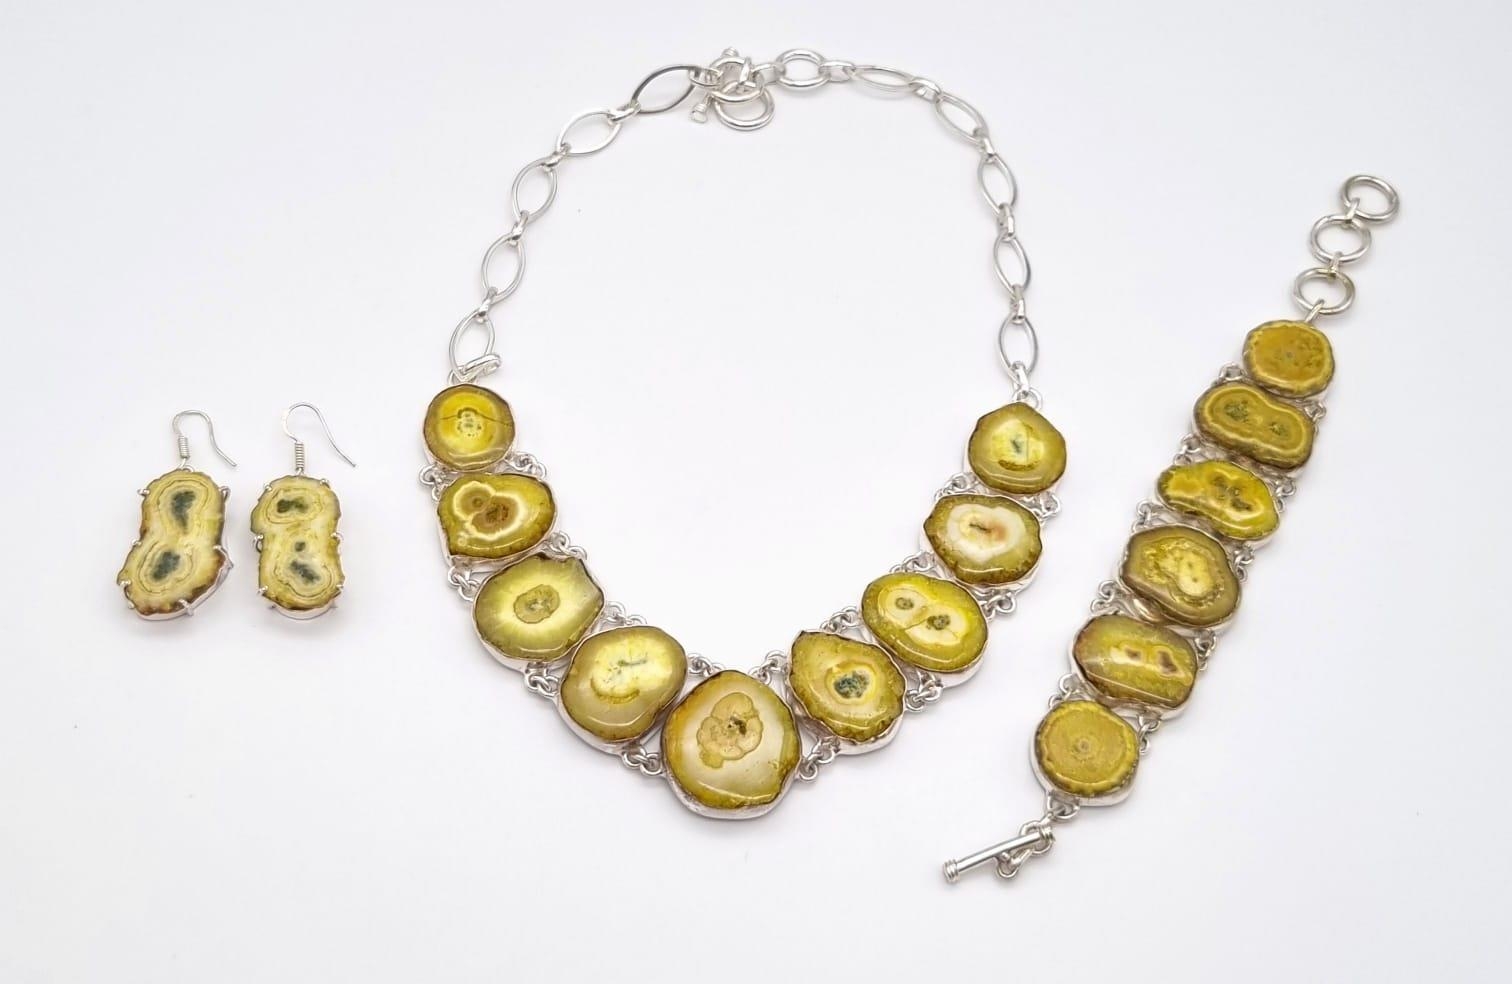 A very unusual and unique, sterling silver, yellow solar quartz necklace, bracelet and earrings set. - Image 2 of 5